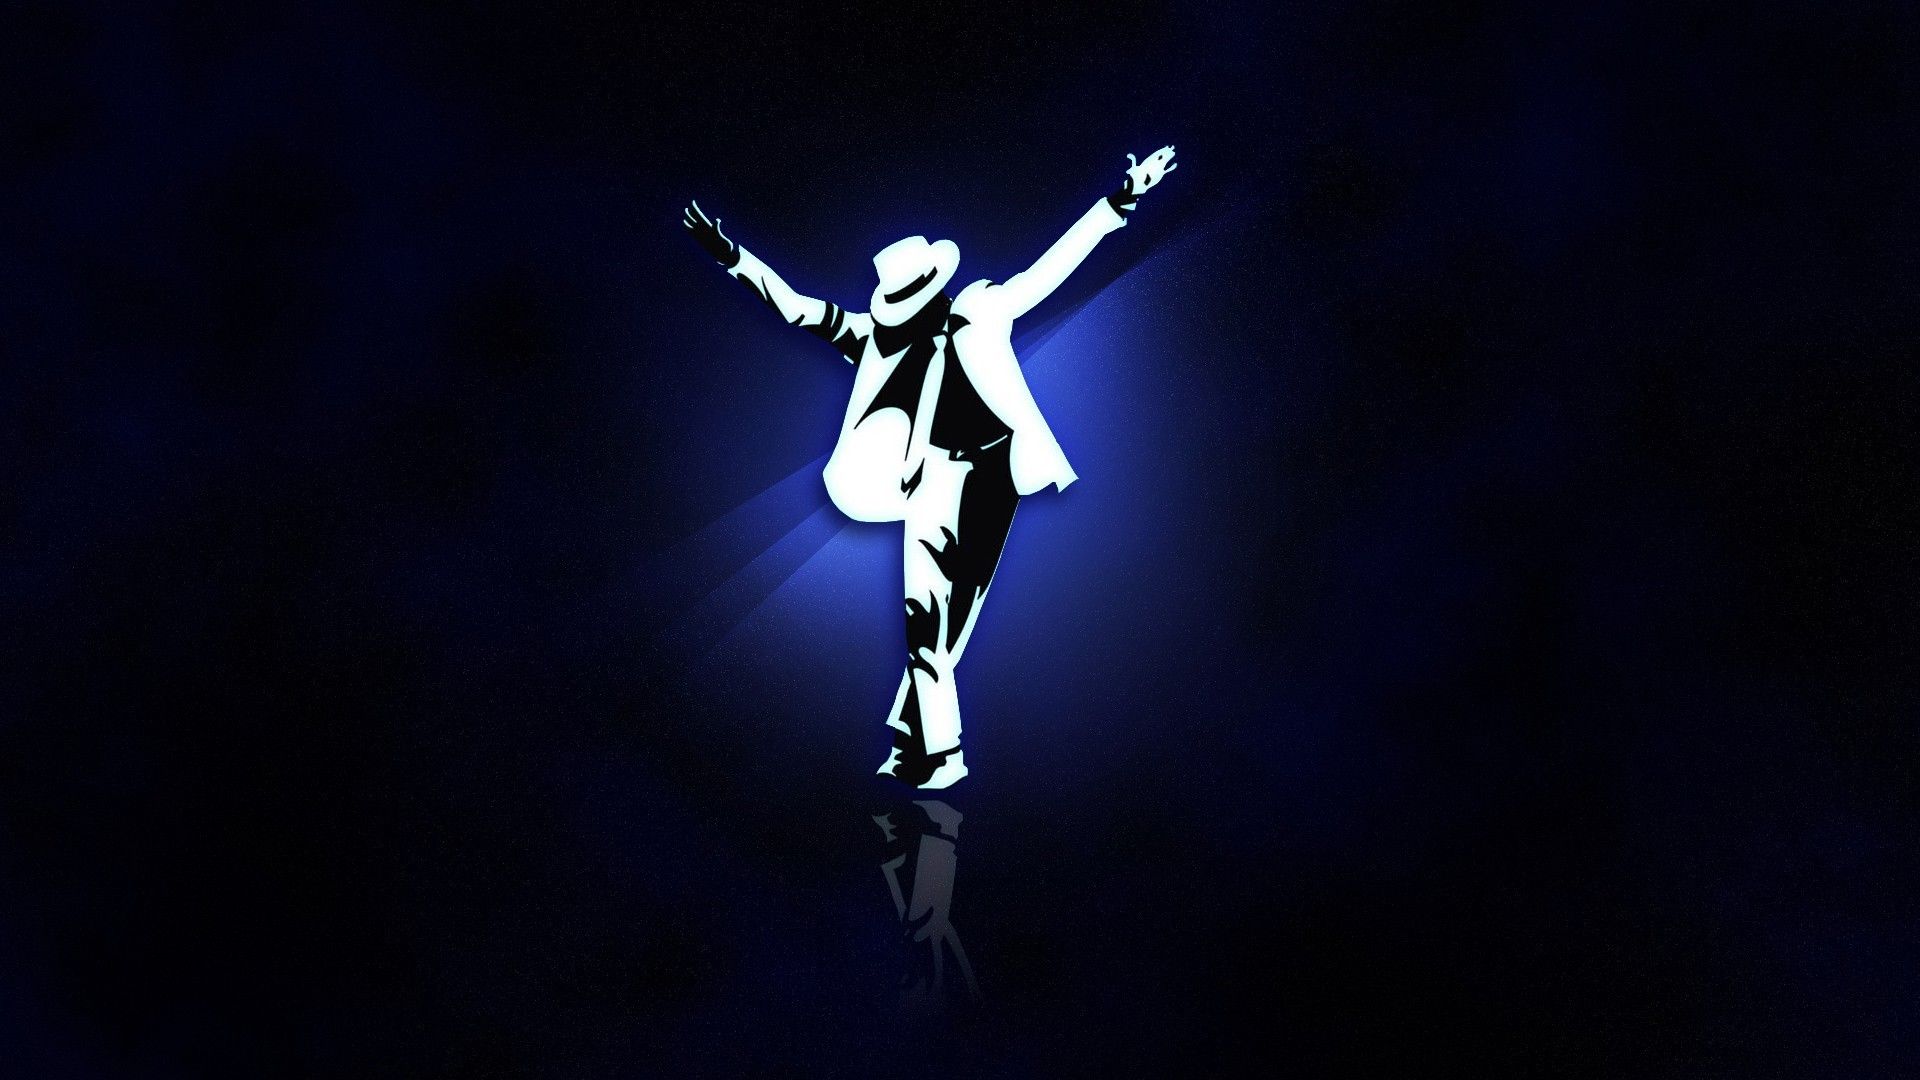 Michael Jackson Wallpaper High Resolution and Quality Download